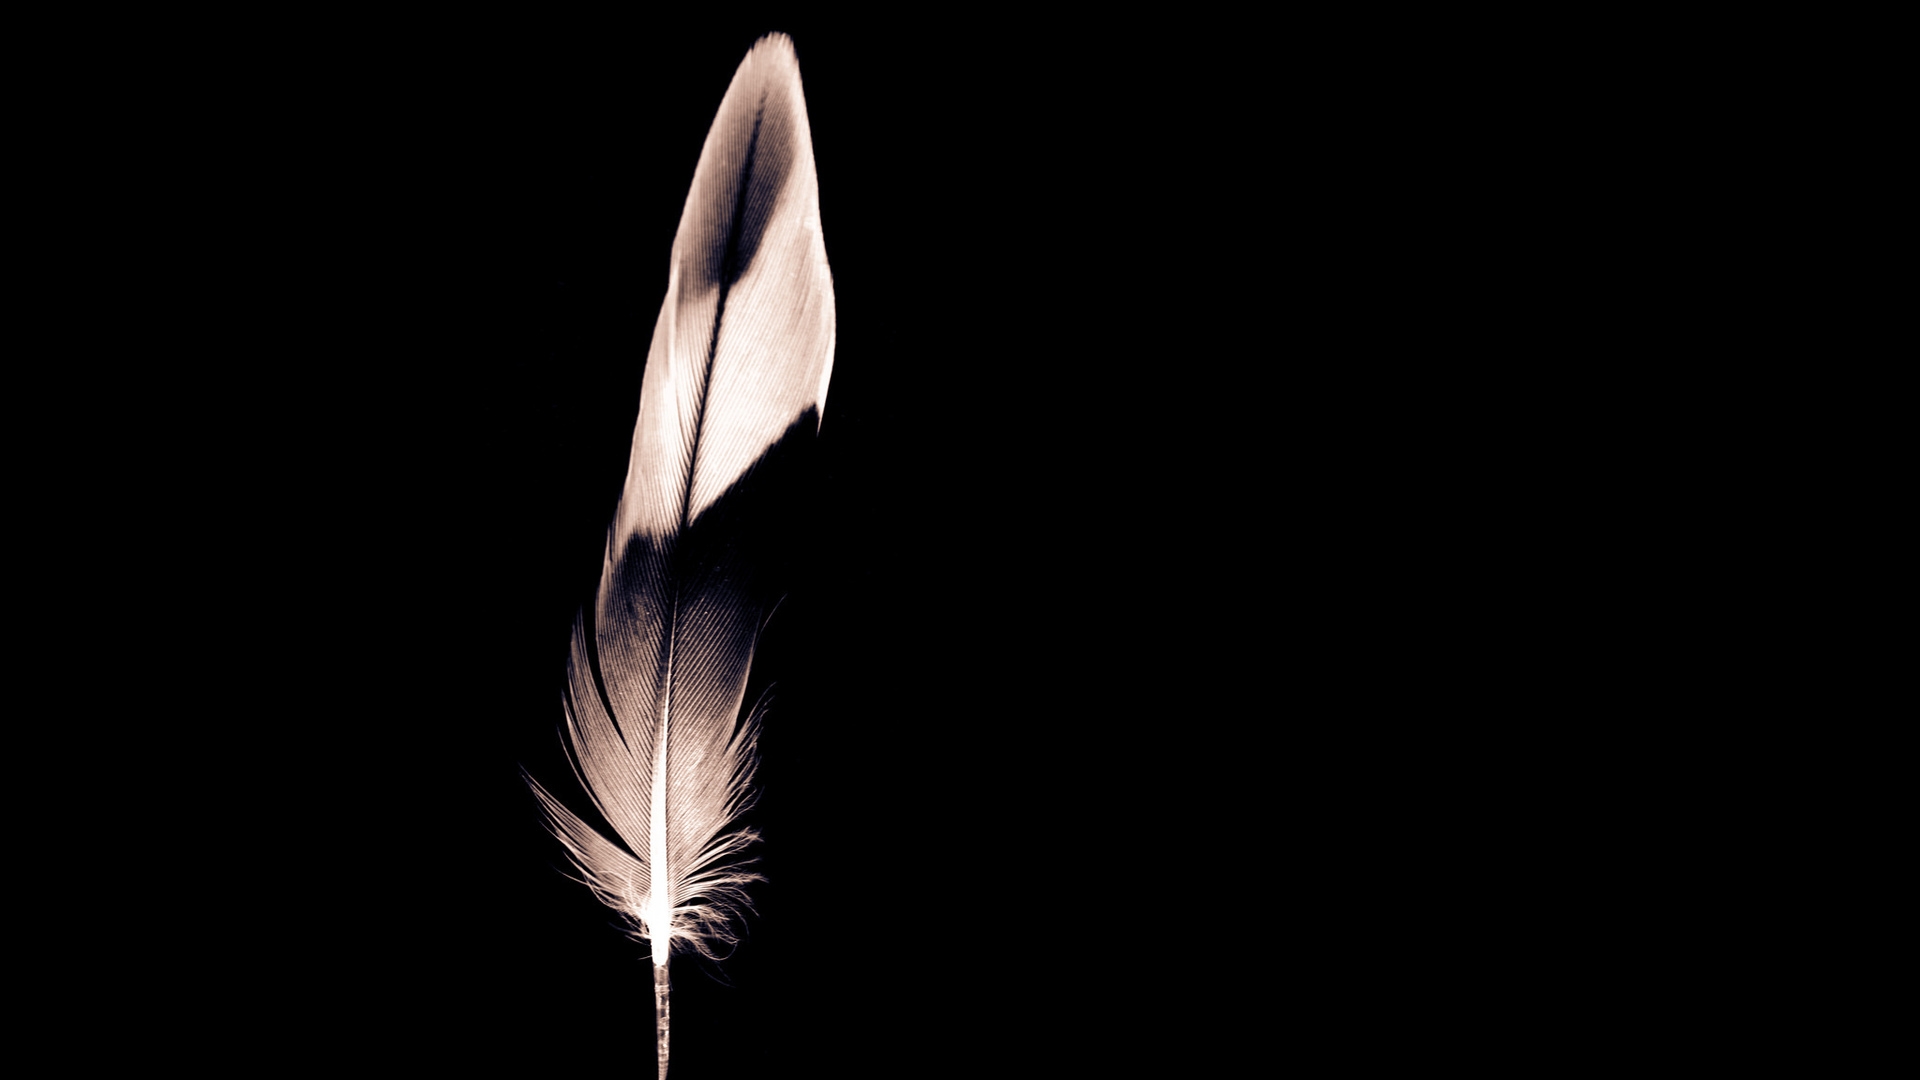 Minimalist Feather for 1920 x 1080 HDTV 1080p resolution